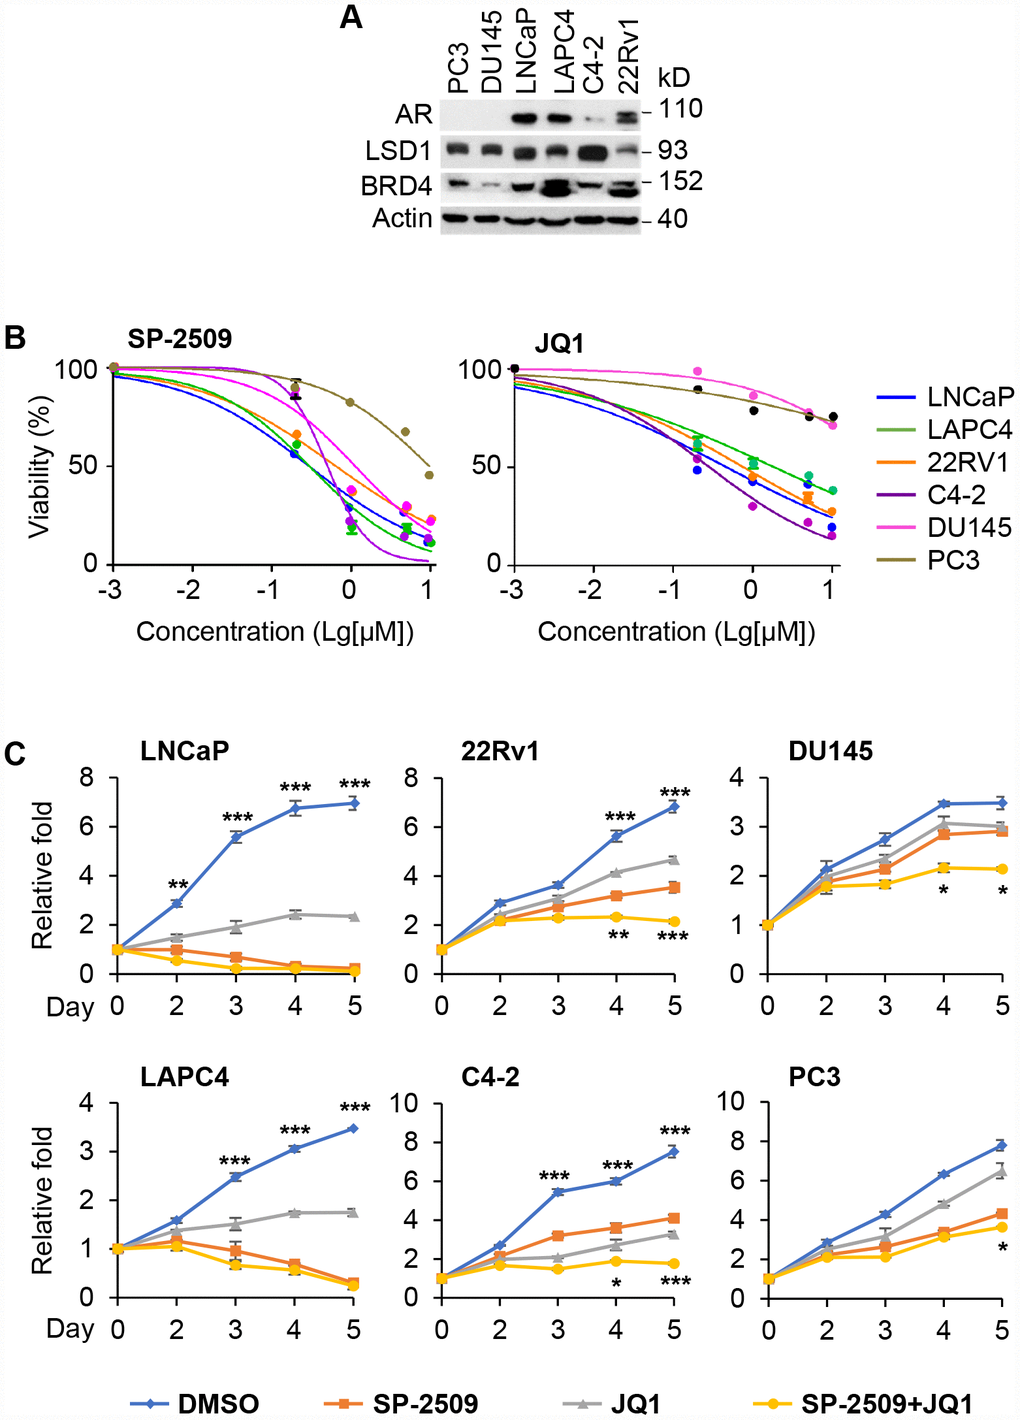 Inhibition of LSD1 reduces the proliferation in both AR-positive and AR-negative PCa cells but inhibition of BRD4 has no effect on AR-negative PCa cells. (A) Western blot analysis of AR, LSD1 and BRD4 expression in PC3, DU145, LNCaP, LAPC4, C4-2 and 22Rv1 cells. (B) The indicated cancer cells were treated with different doses of SP-2509 or JQ1 for 72 h and cell proliferation was determined by MTT assay. (C) The indicated cancer cells were treated with 1μM JQ1 or SP-2509 alone, or in combination for different time periods and cell proliferation was determined by MTT assay. Graphic data are the means ± SD of four replicate experiments. Statistical significance are determined by ANOVA with: * indicates P 